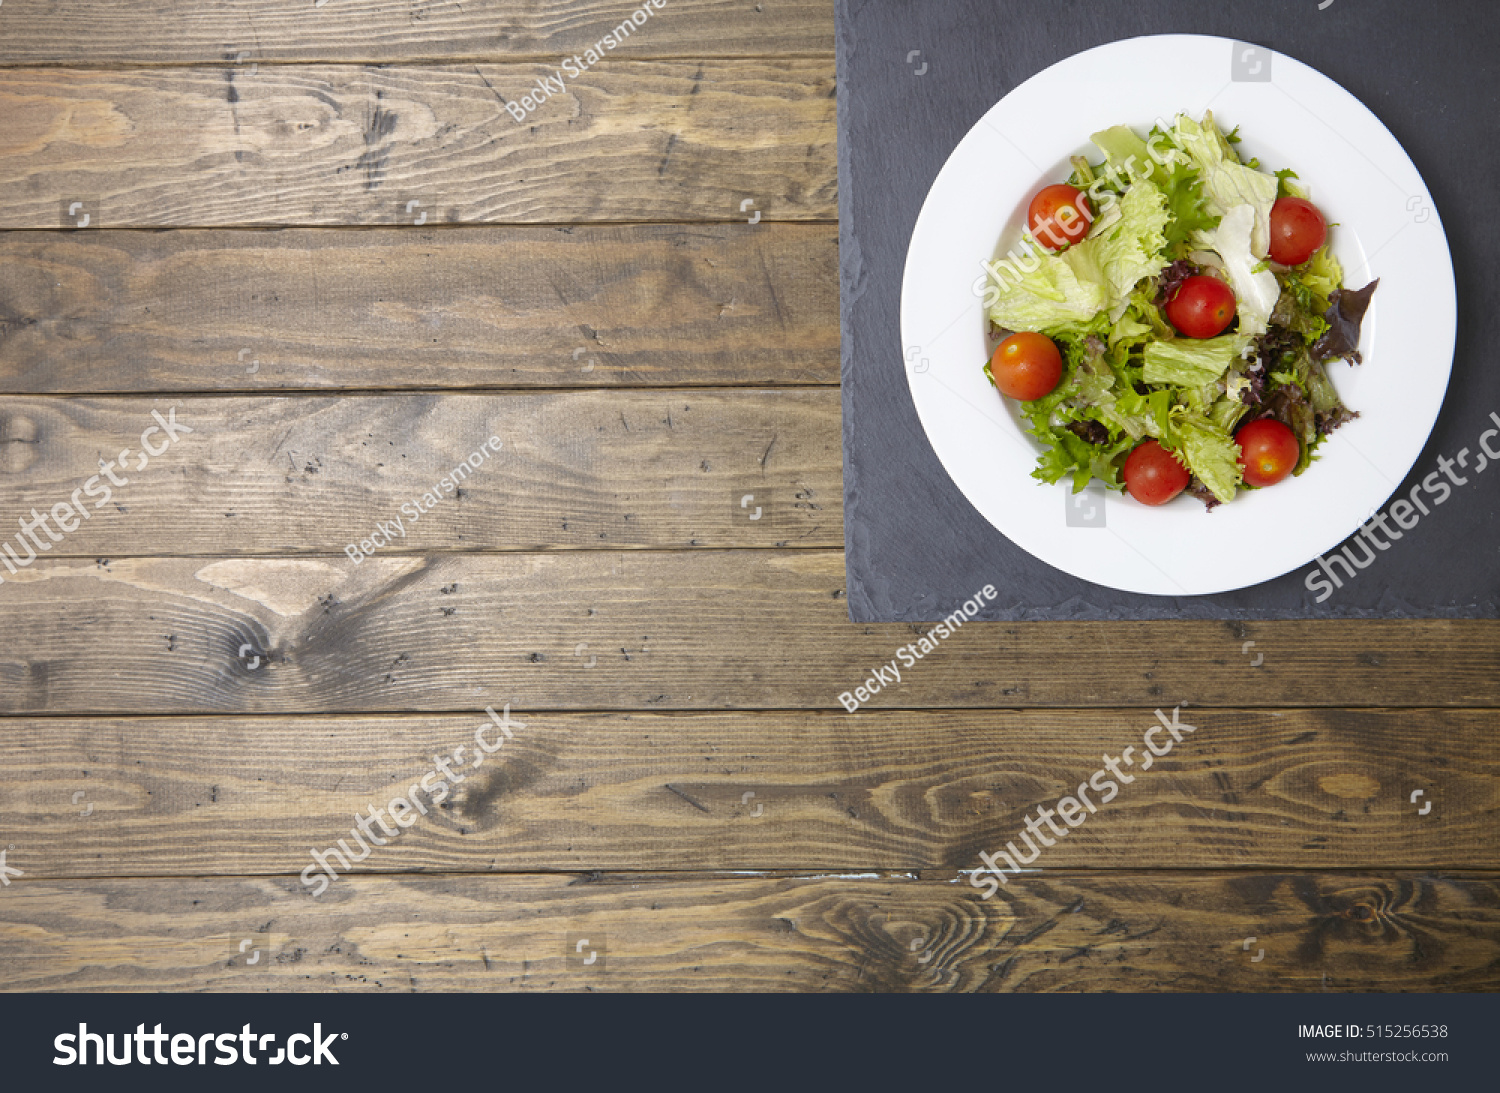 A bowl of fresh garden salad on a rustic wooden table top background, with empty space at side #515256538